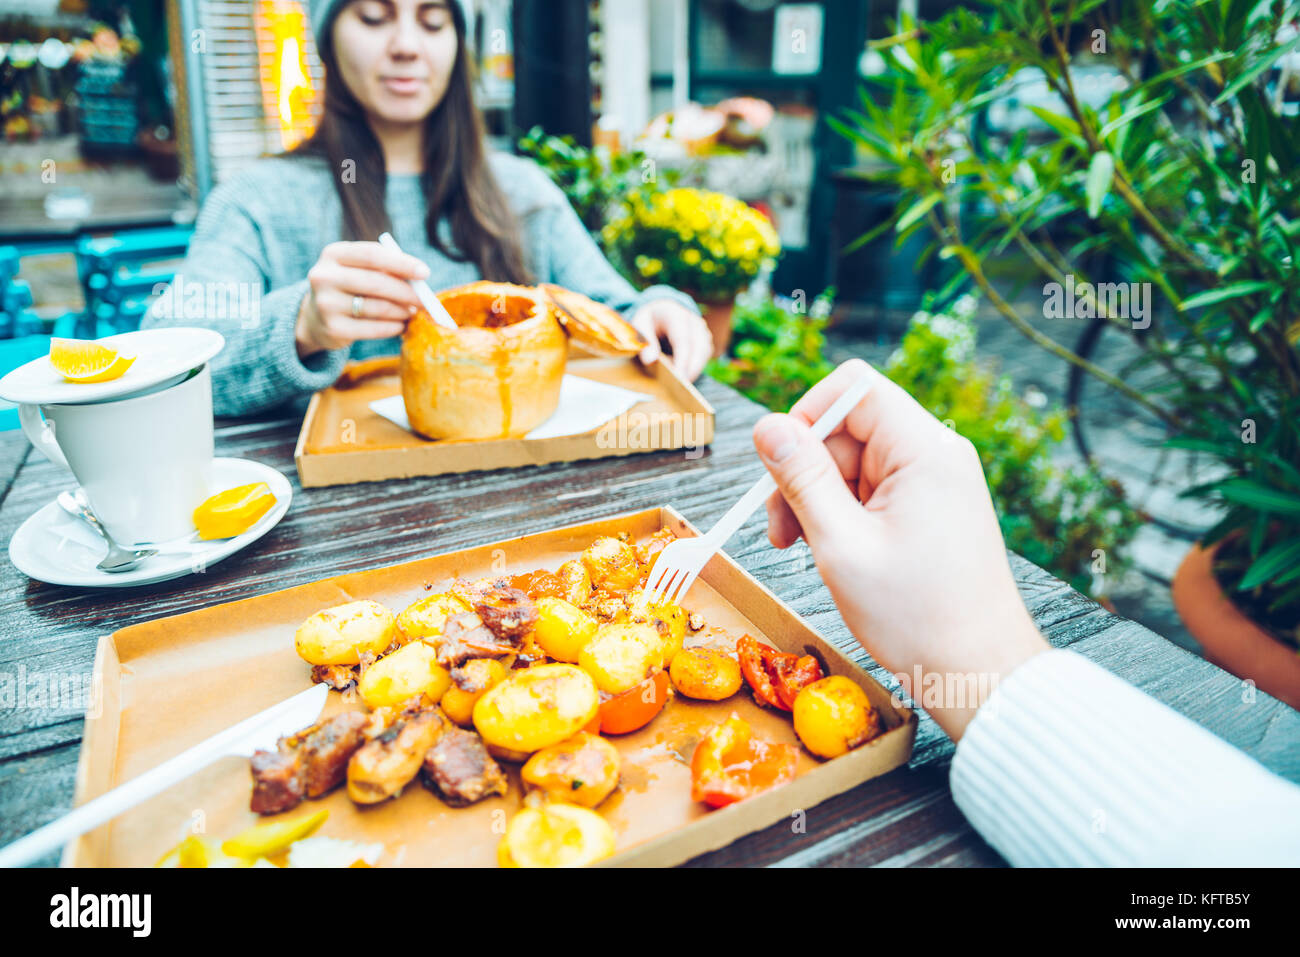 couple eating in cafe outside Stock Photo